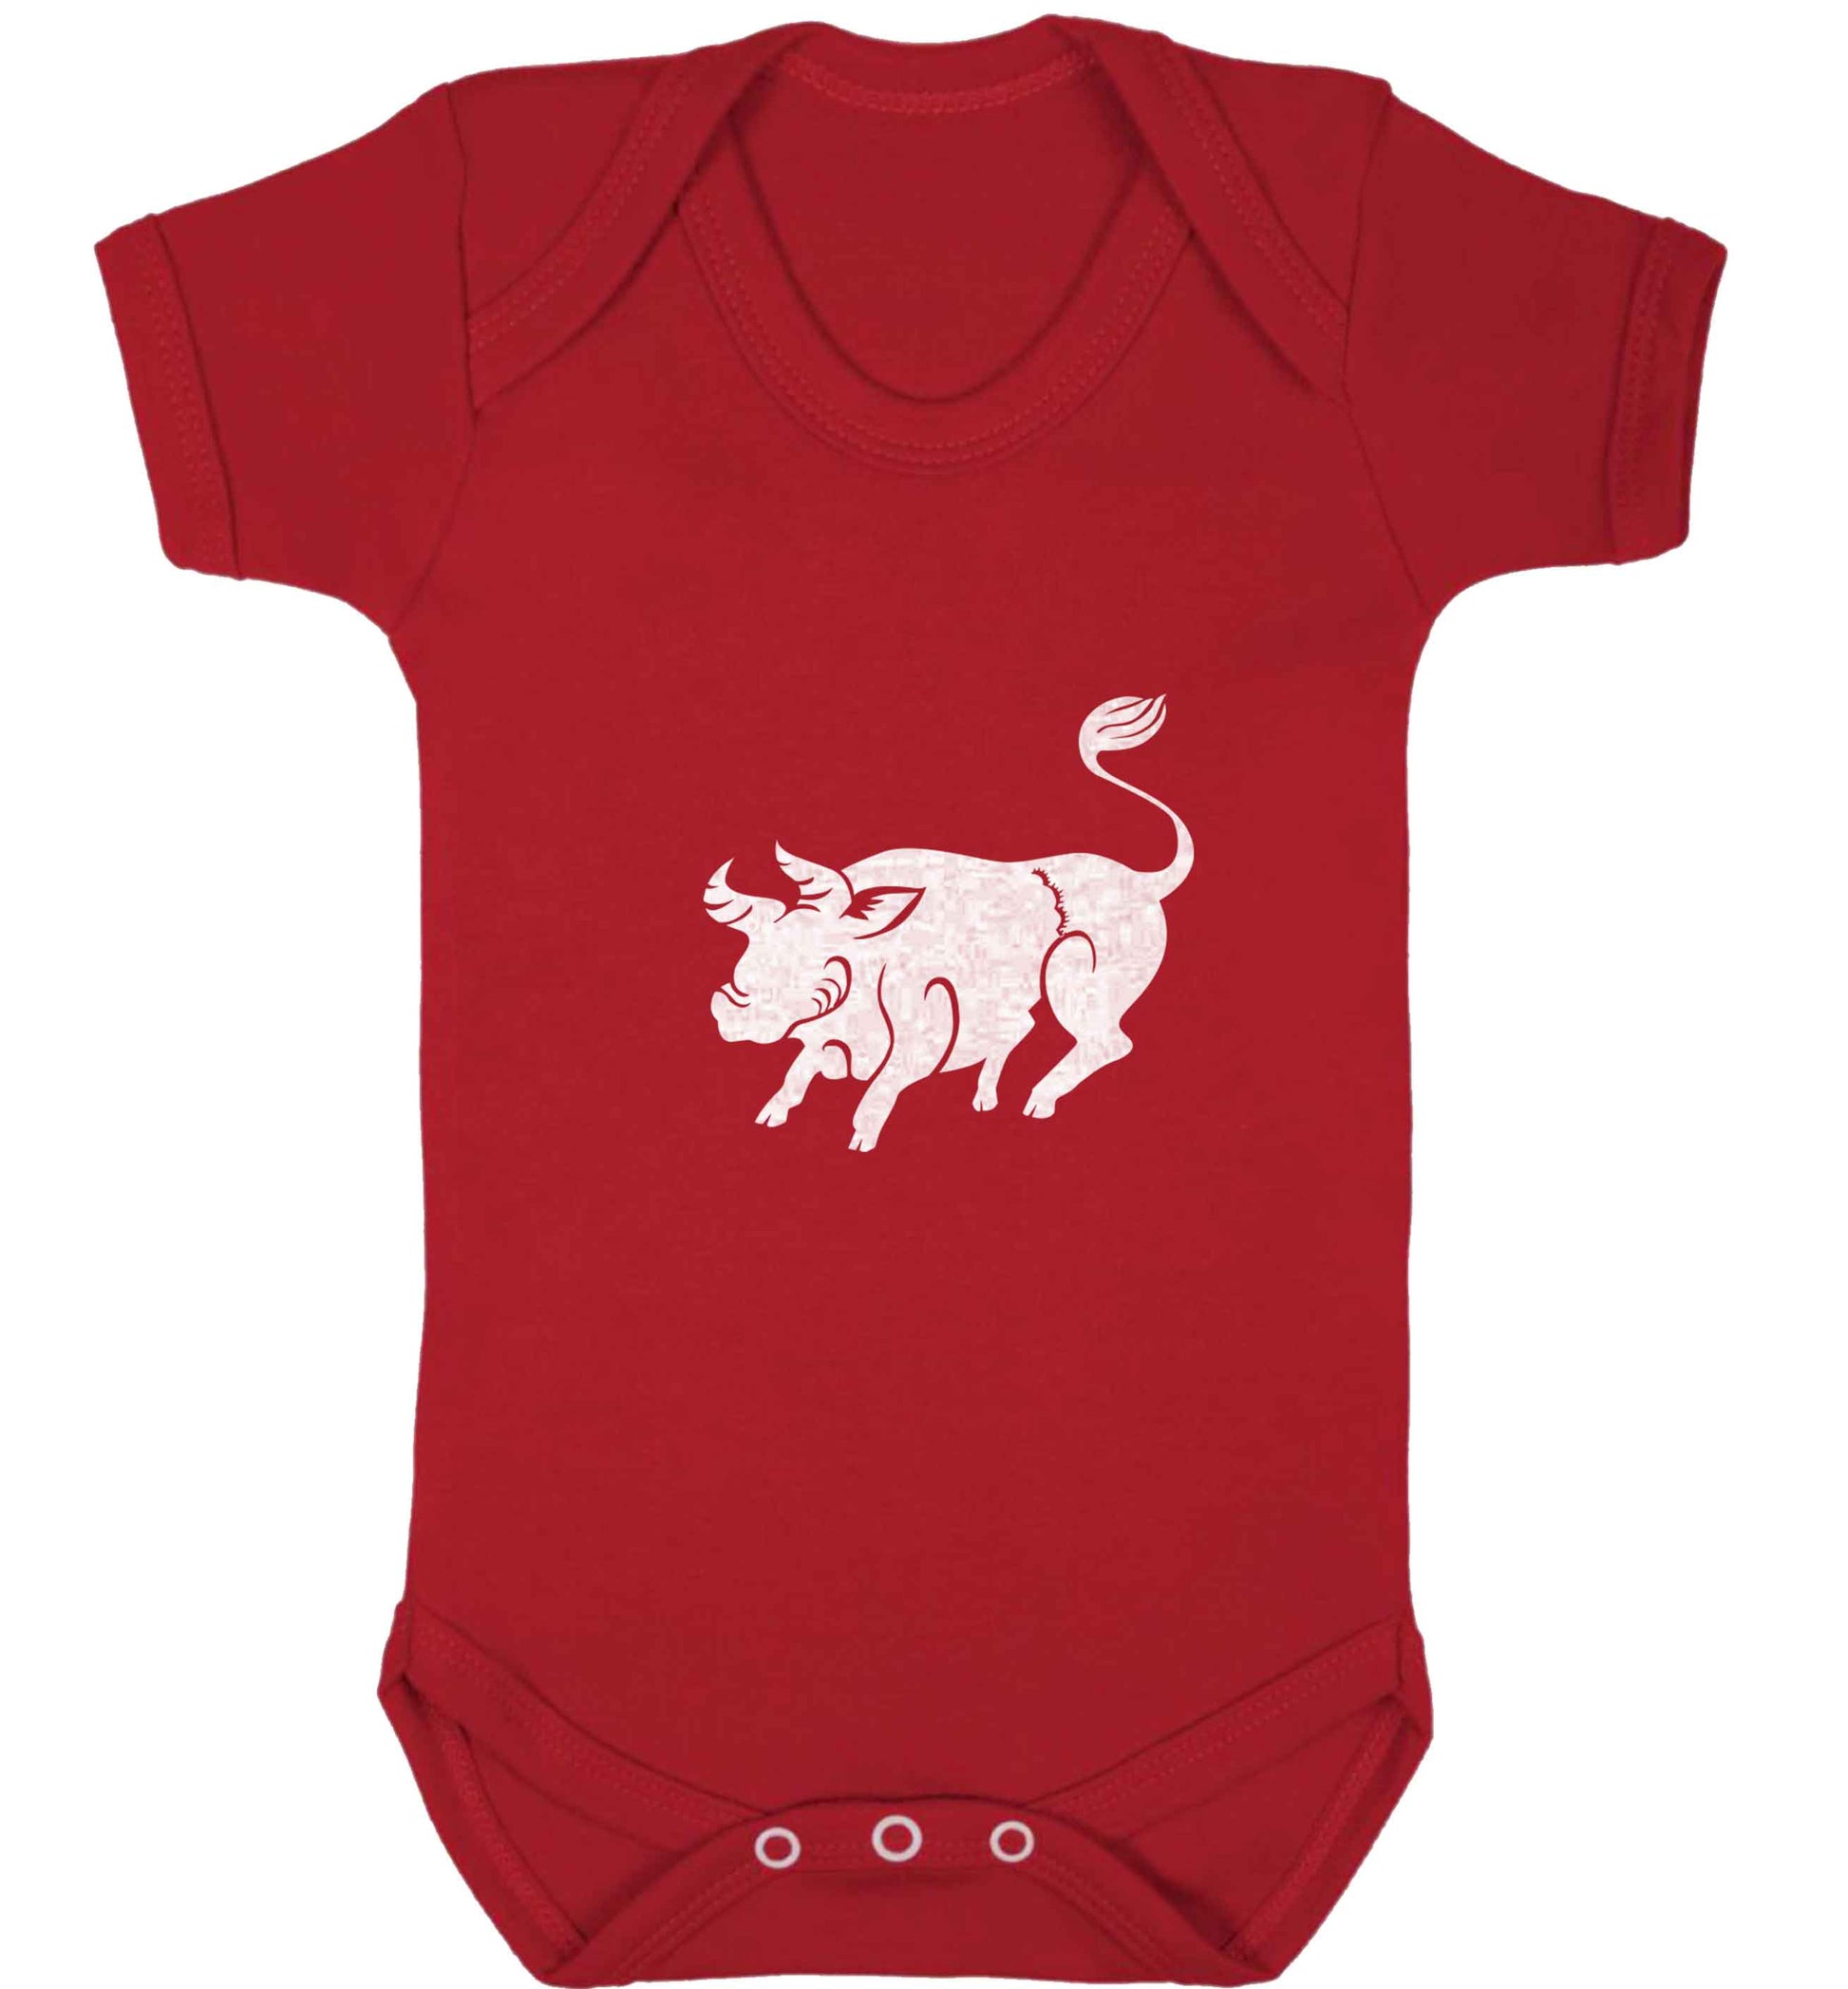 Pig face baby vest red 18-24 months